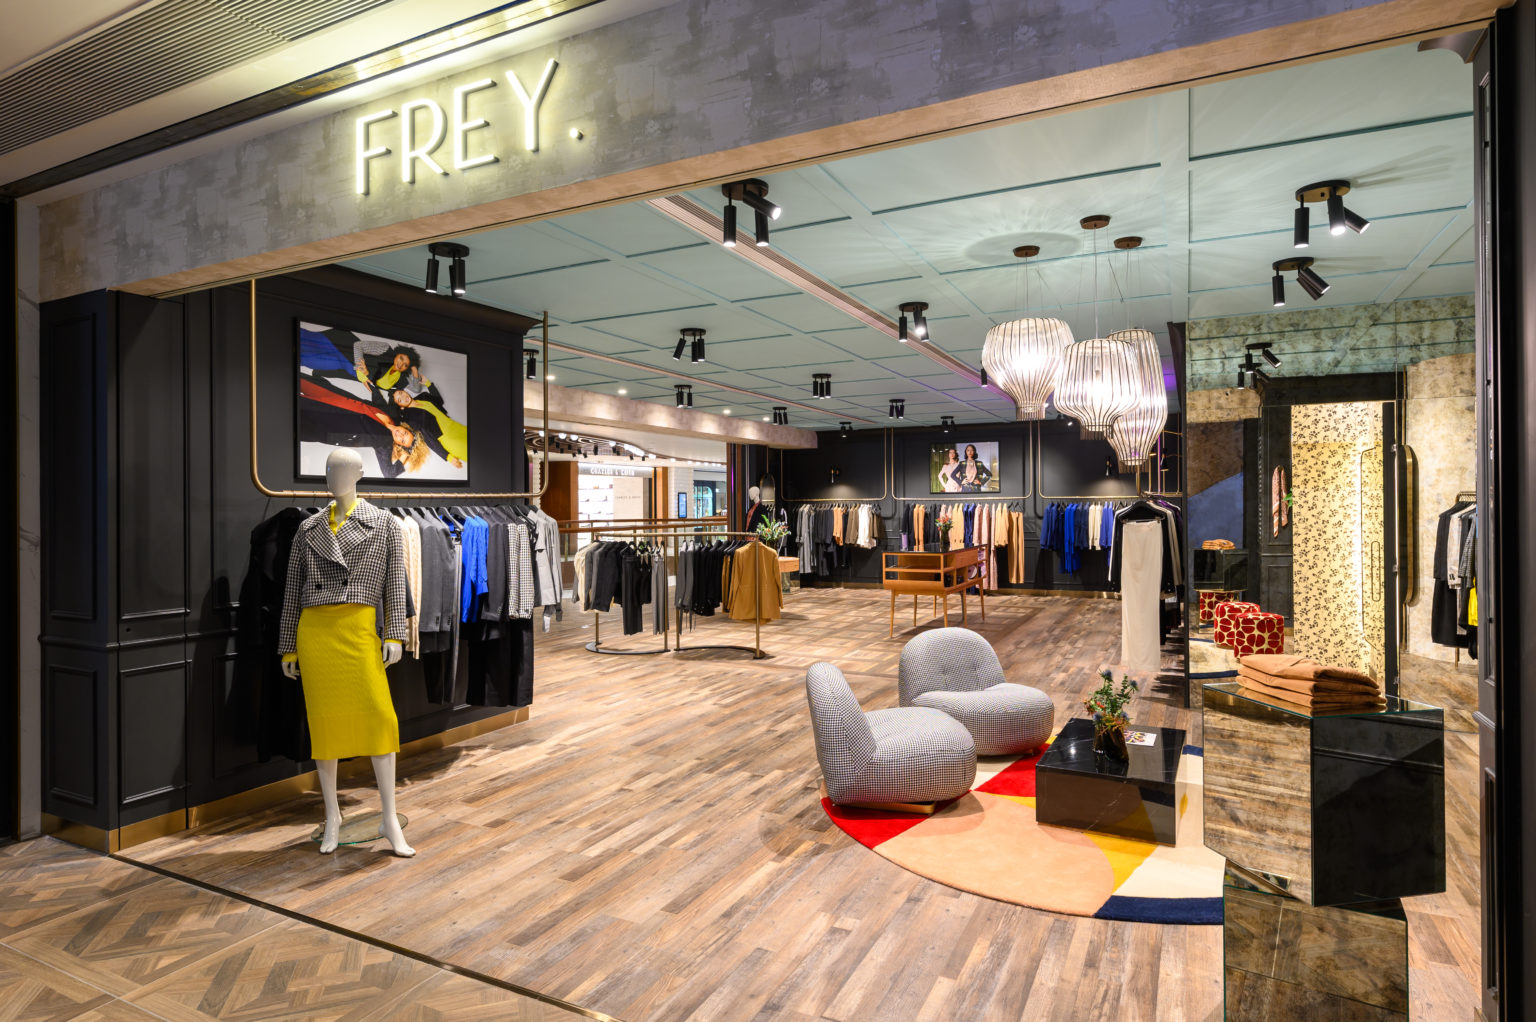 FREY. LAUNCHES NEW RETAIL CONCEPT AT K11 MUSEA